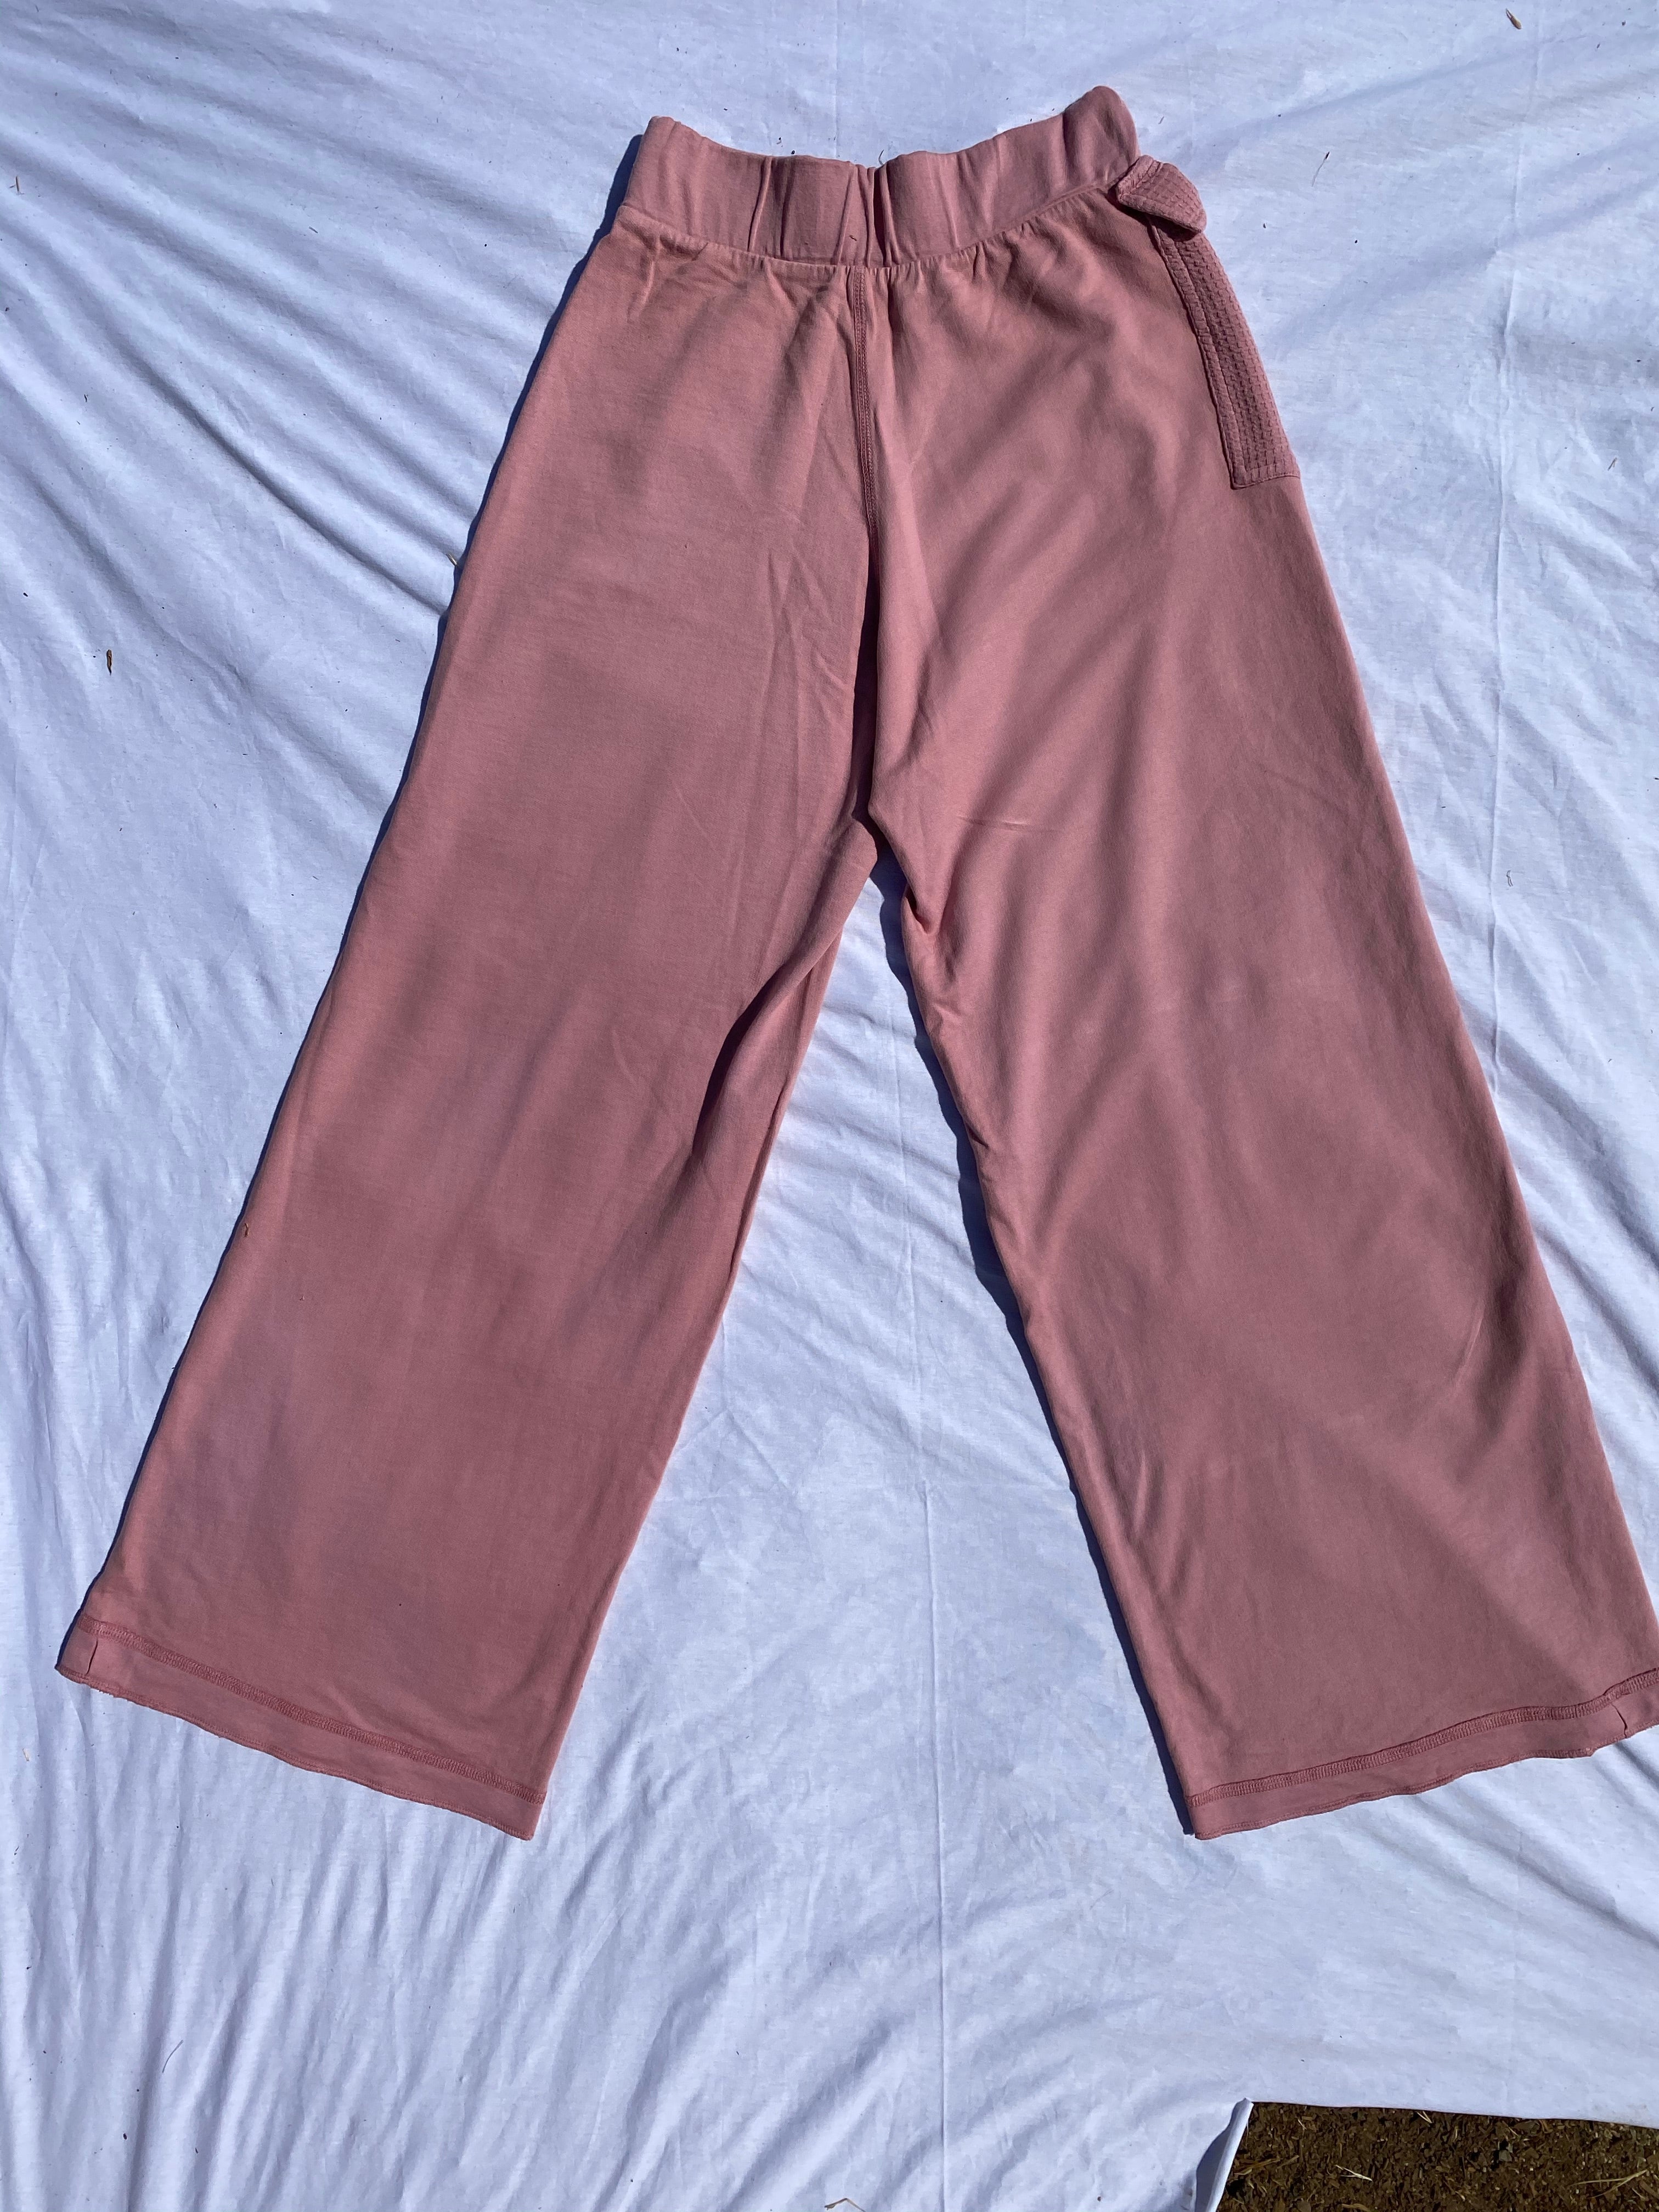 The pink french terry bell bottoms